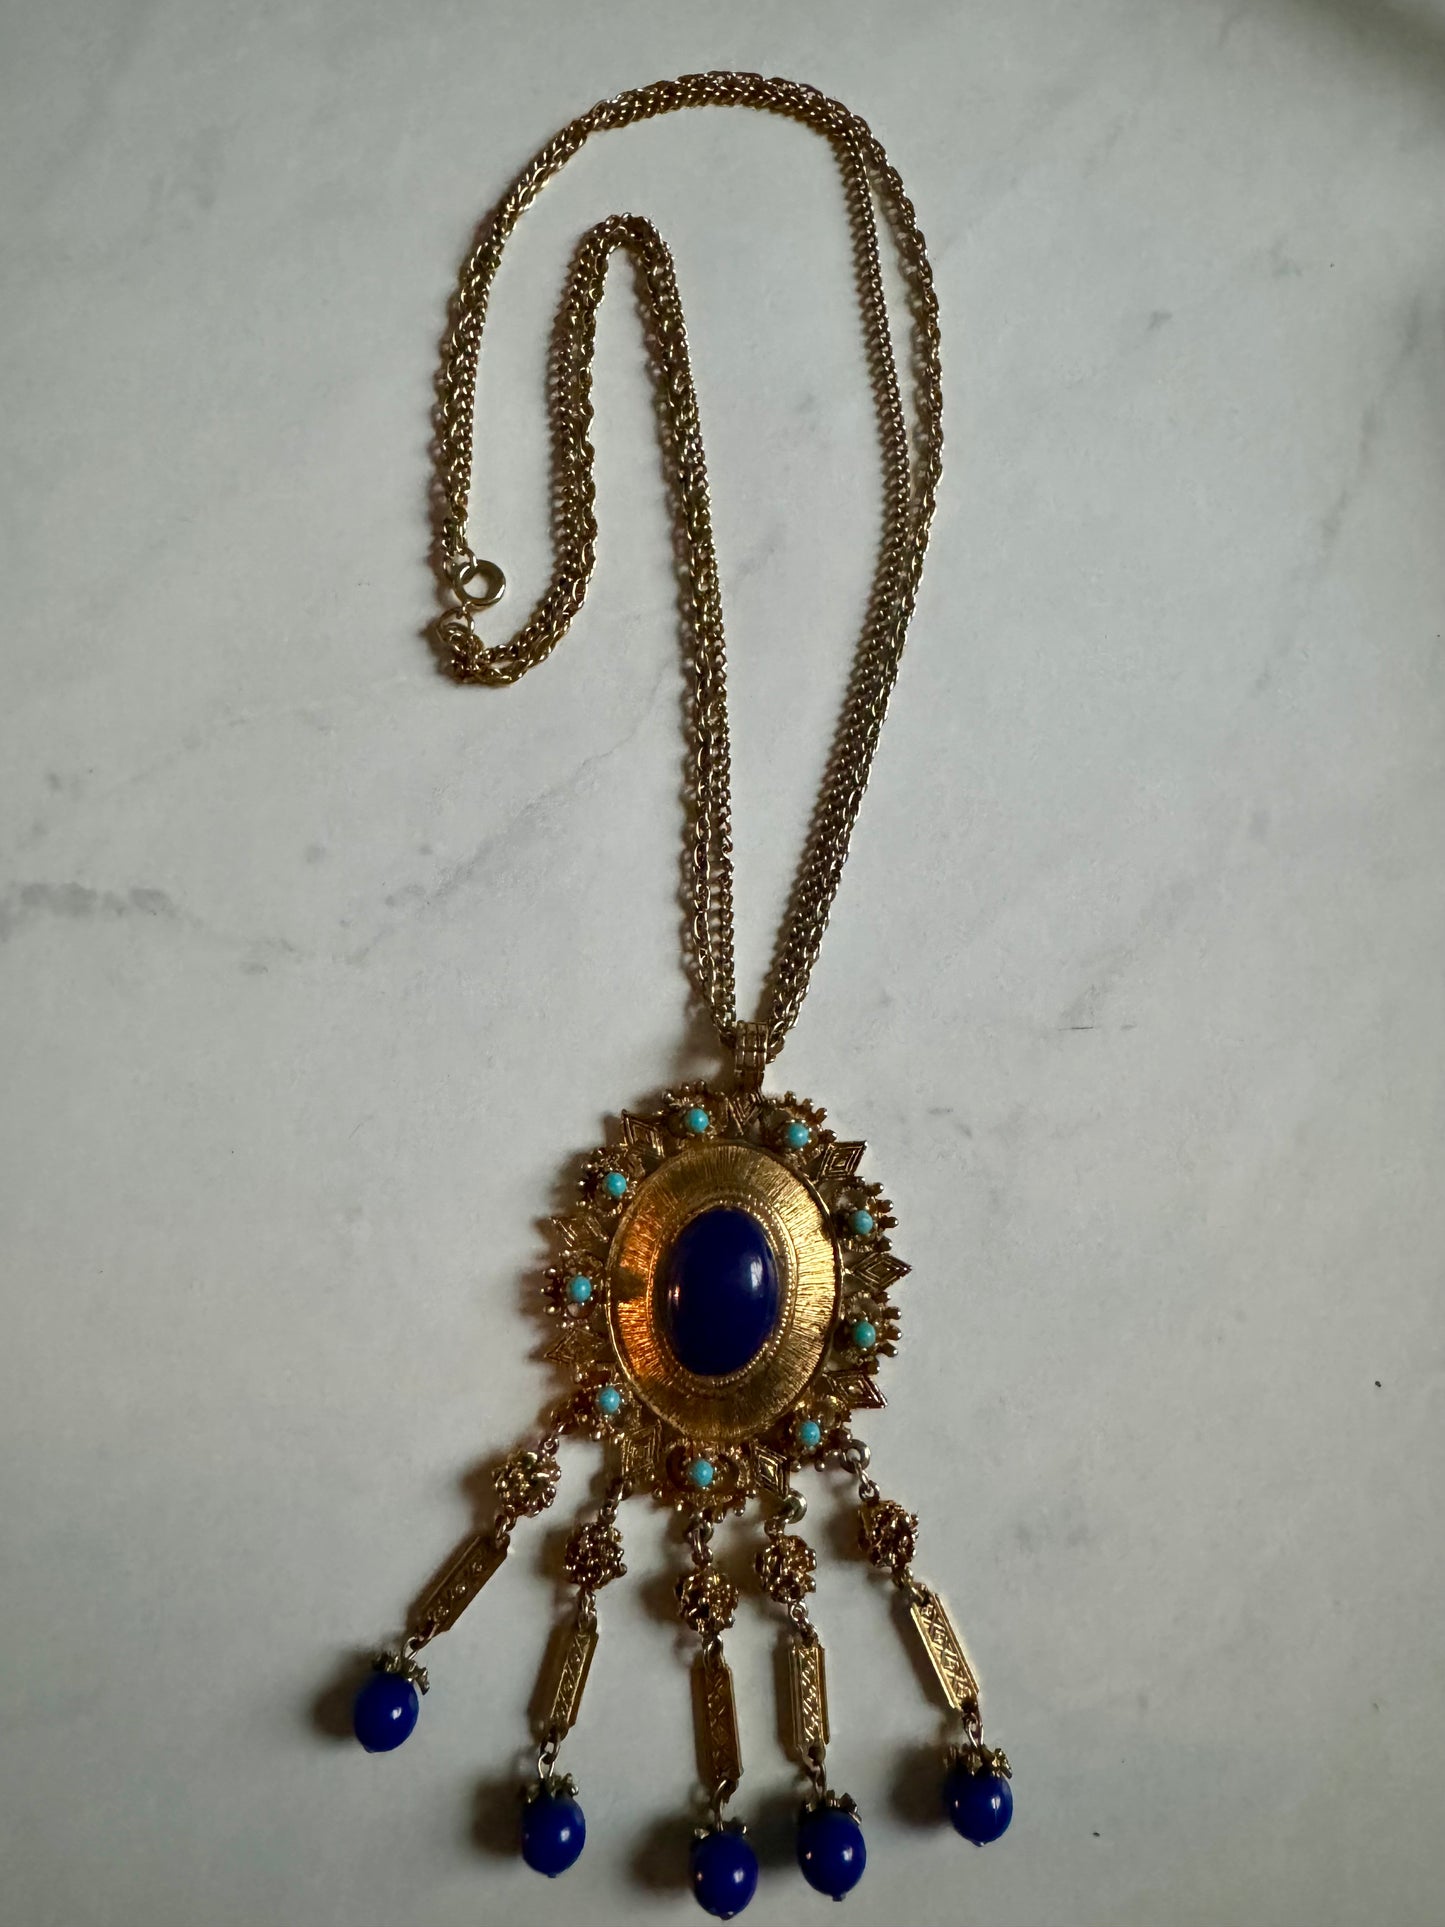 Stunning vintage gold tone necklace with turquoise and blue pendant.